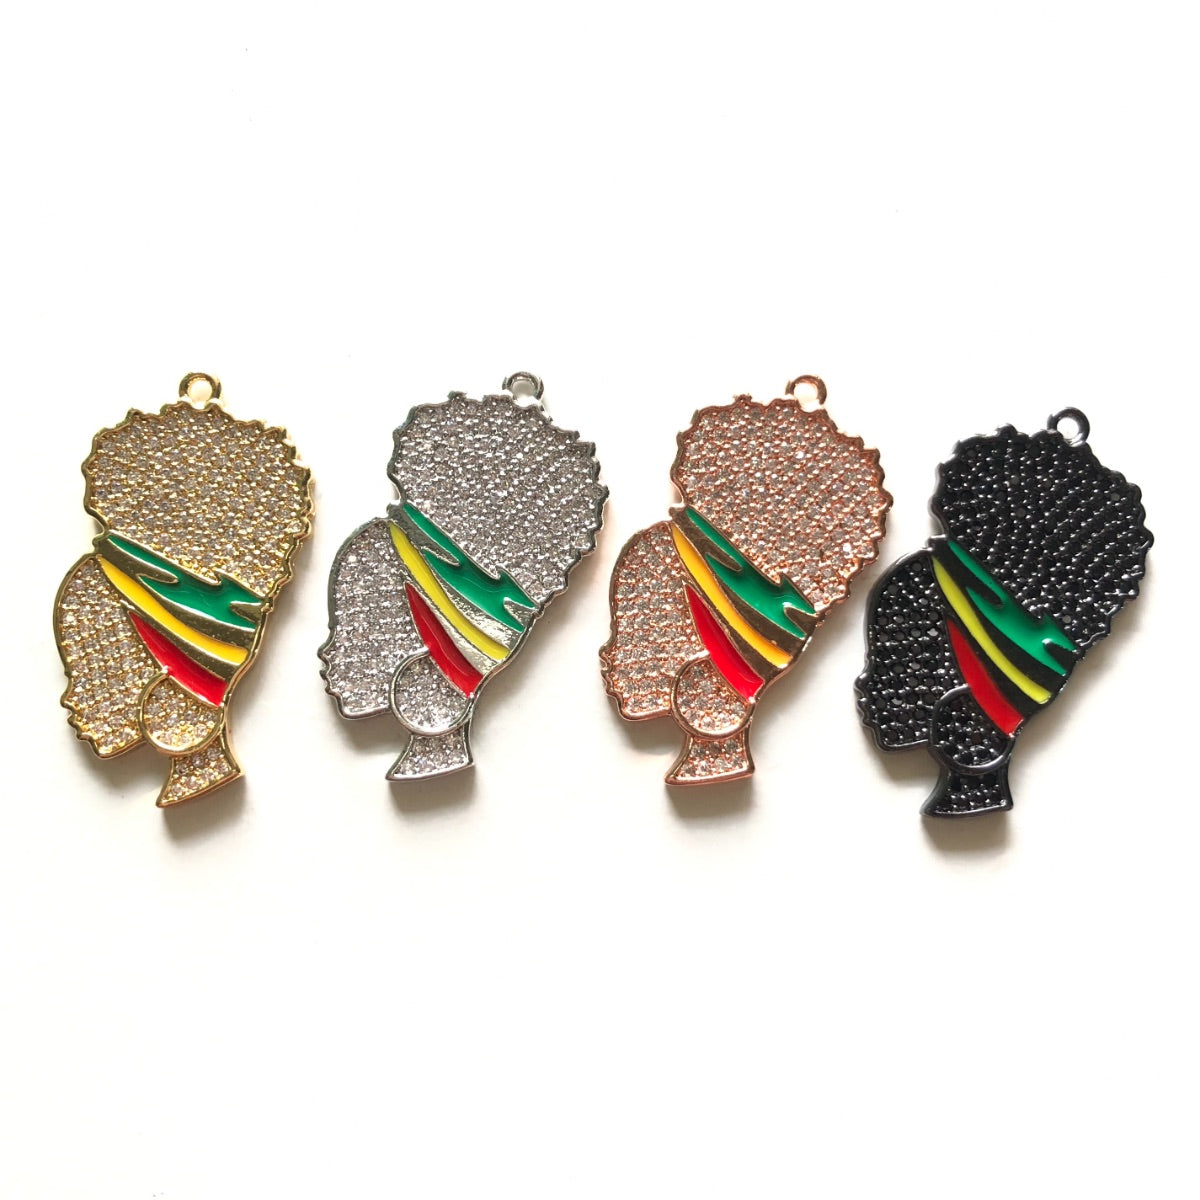 10pcs/lot 35*22mm CZ Paved Afro Girl Charms for Juneteenth CZ Paved Charms Afro Girl/Queen Charms Juneteenth & Black History Month Awareness Charms Beads Beyond